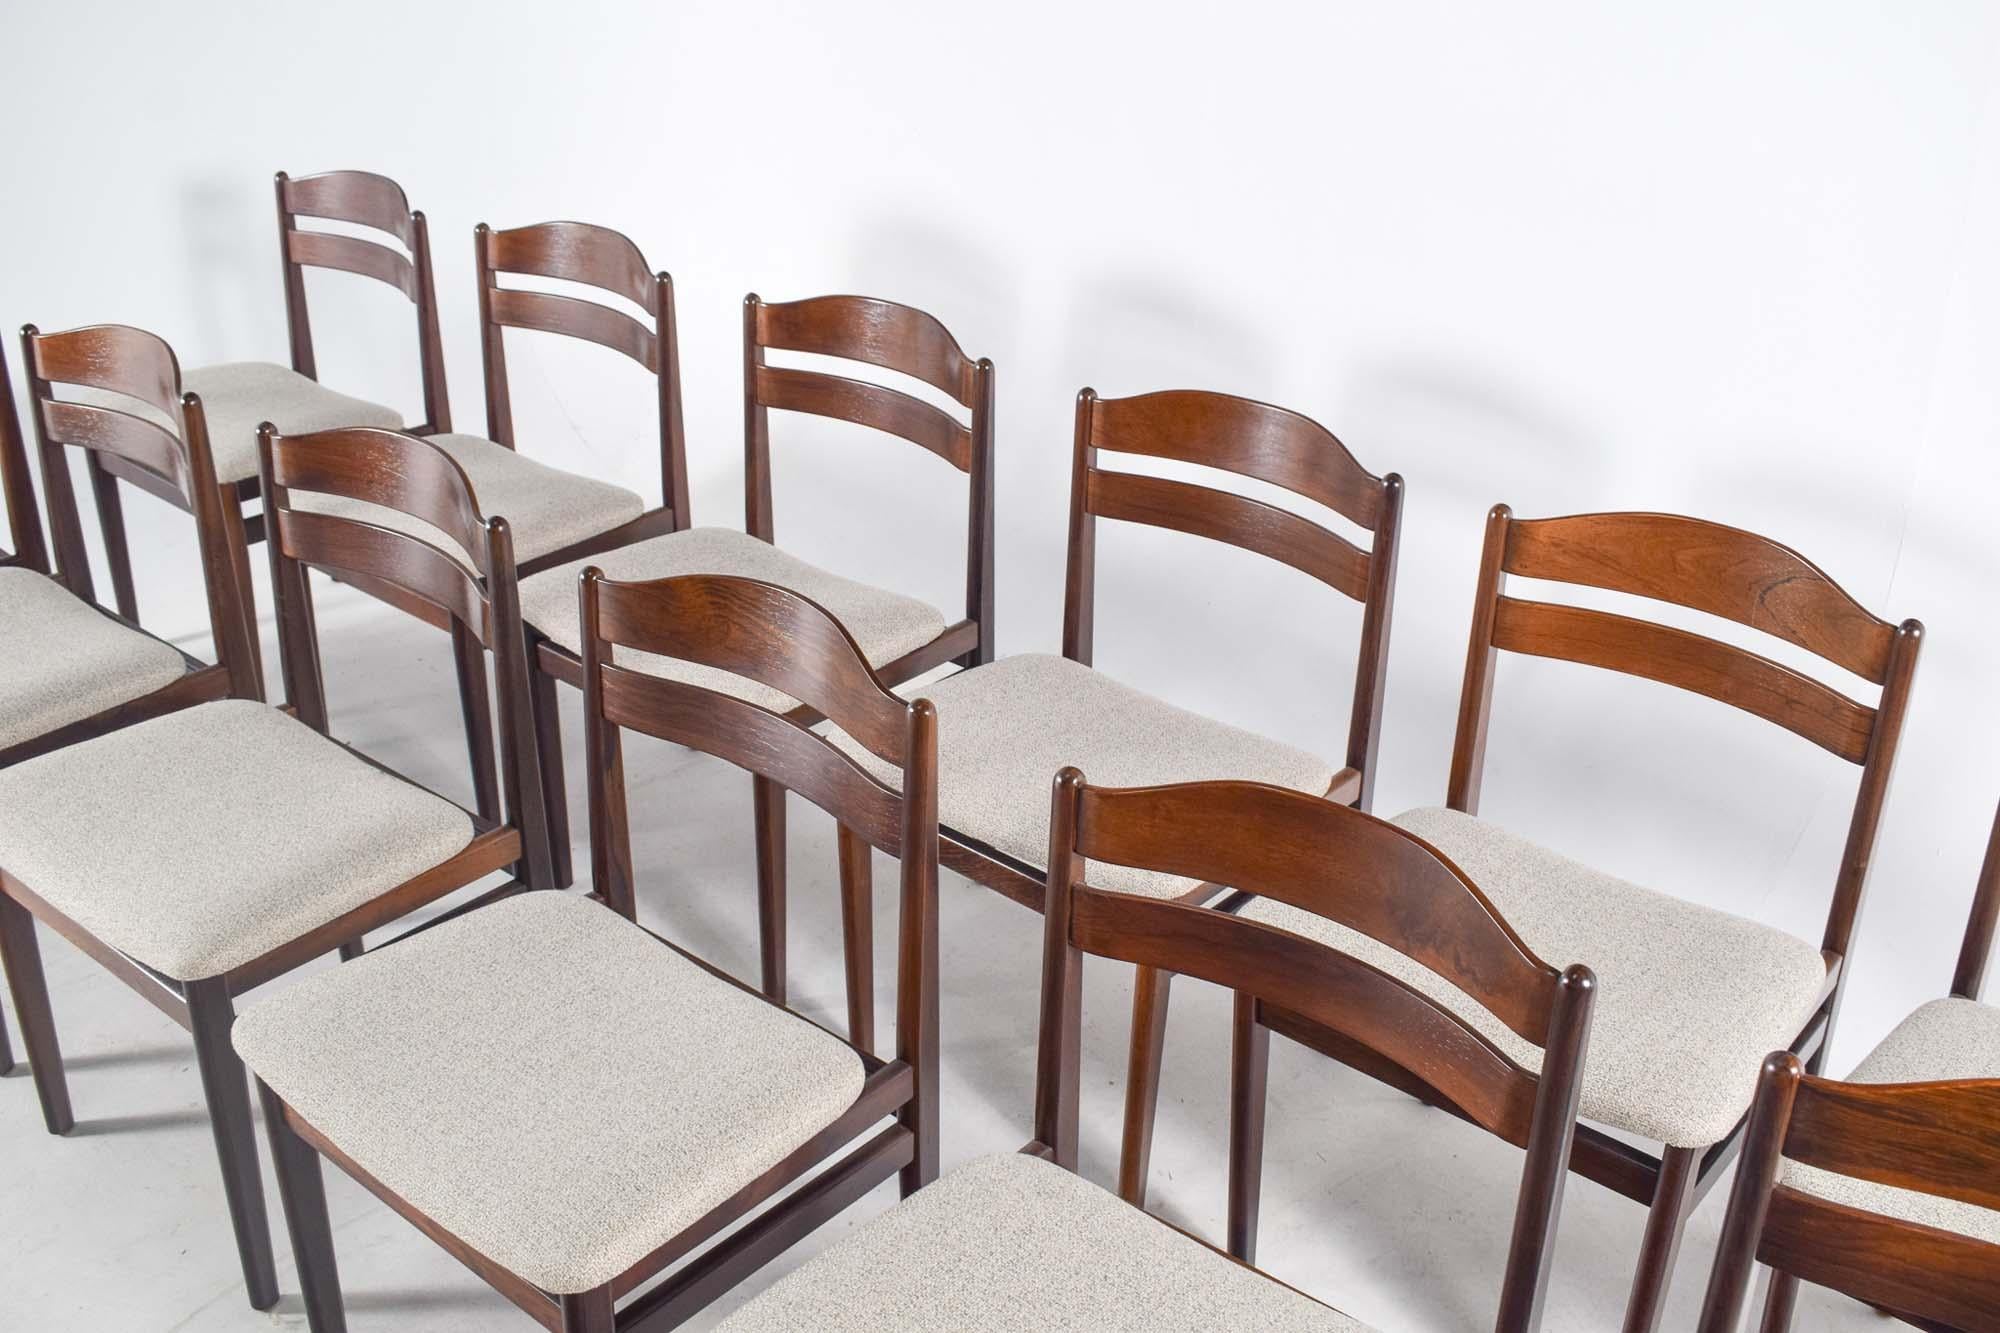 This exquisite set of 12 dining chairs by B.S. Møbler epitomizes the timeless elegance of mid-century design. Crafted from rich, warm rosewood, these chairs feature the sleek, clean lines and organic forms characteristic of the era. Each chair is a